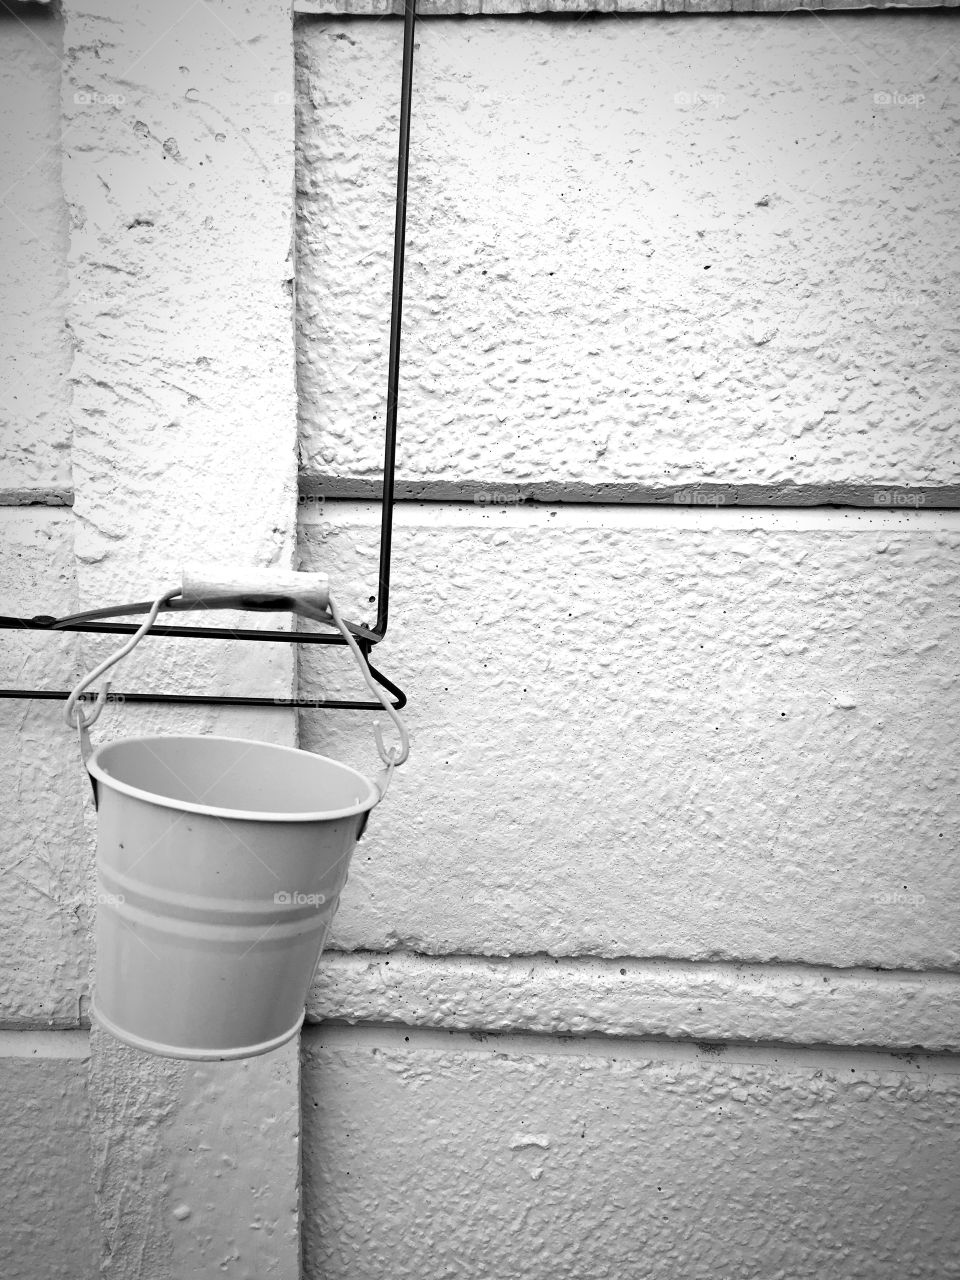 Empty planter bucket suspended on a bland grey wall. All it needs is a bit of green to brighten up the scene.